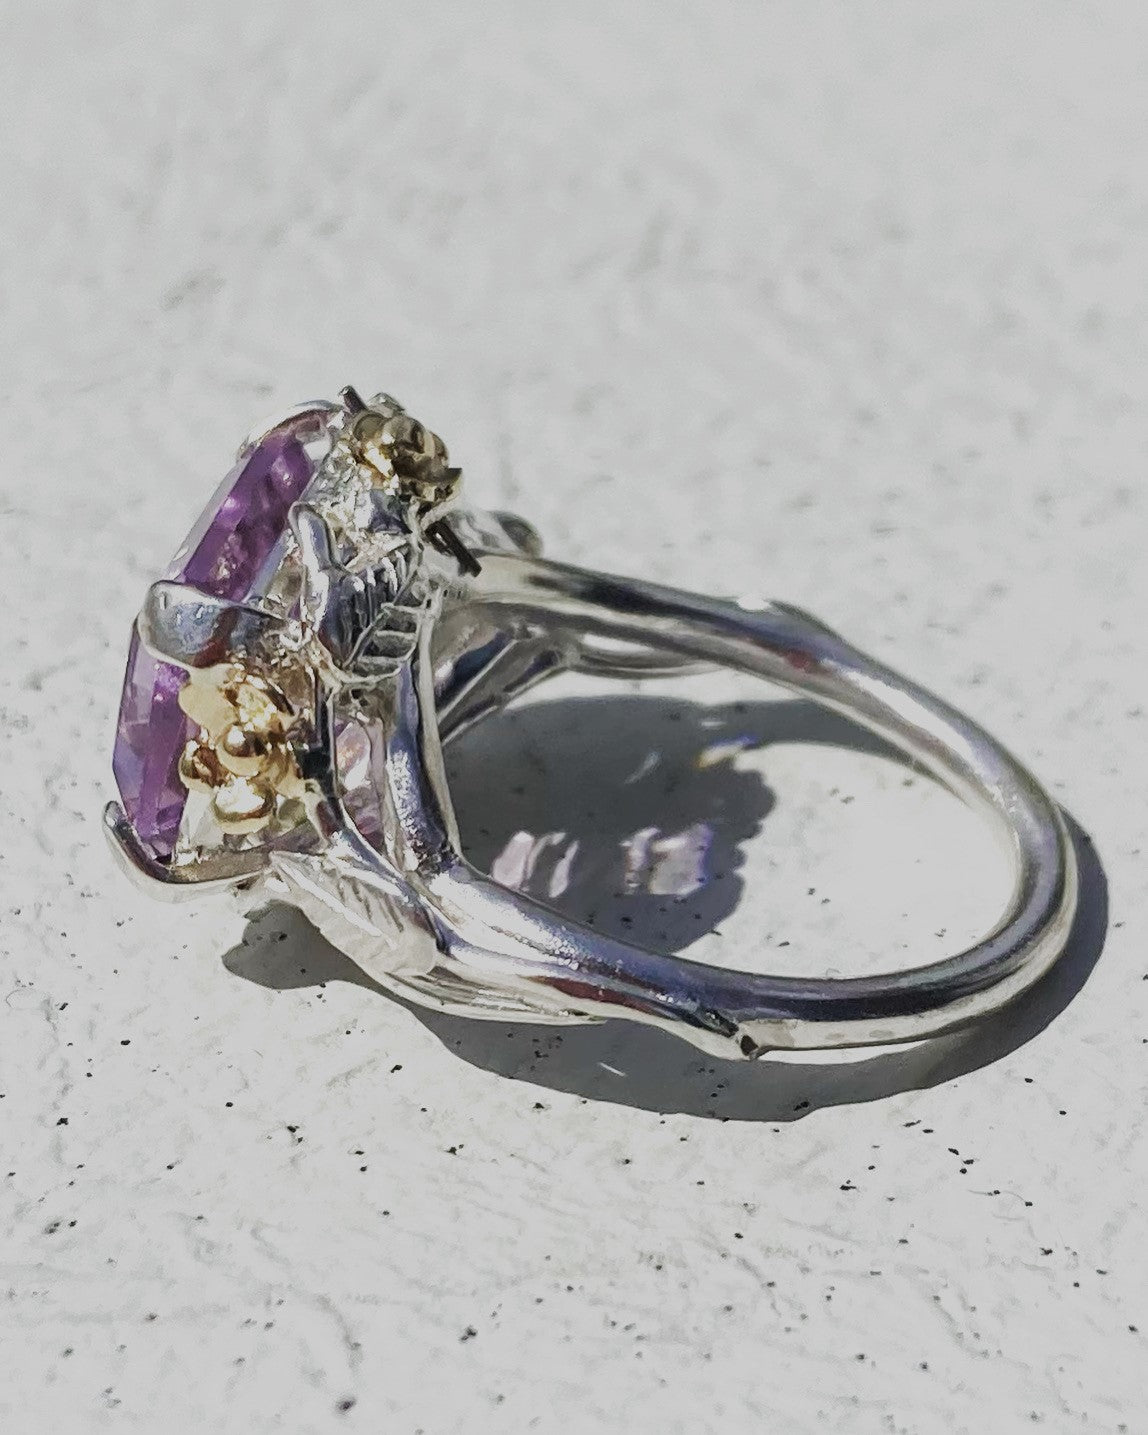 decorative amethyst cocktail ring with flowers and leaves detailing on grey background